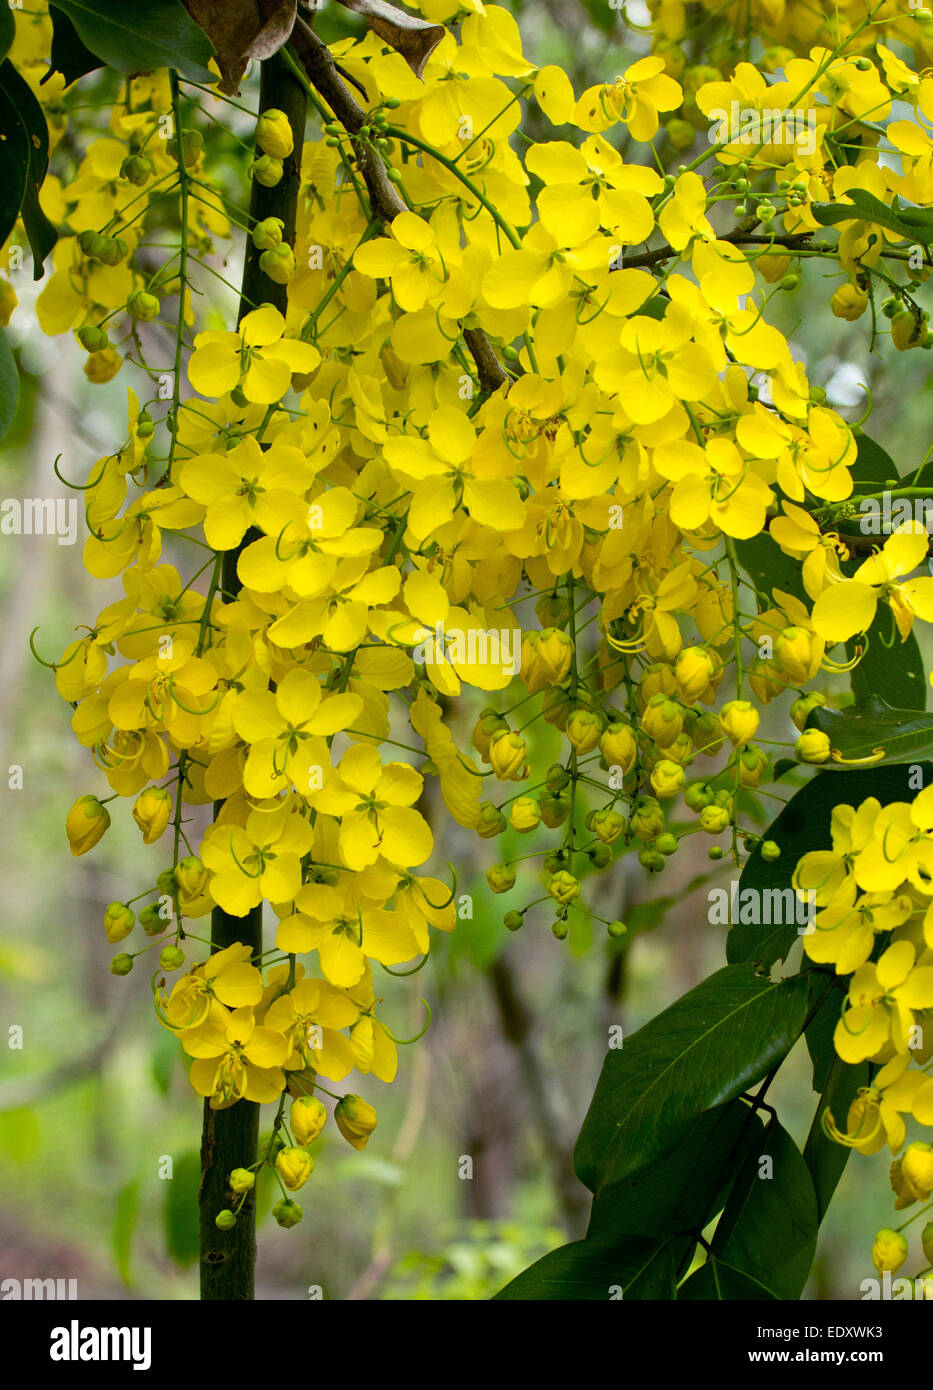 Long racemes of spectacular yellow flowers of Cassia fistula, Golden Shower Tree, against background of green foliage Stock Photo